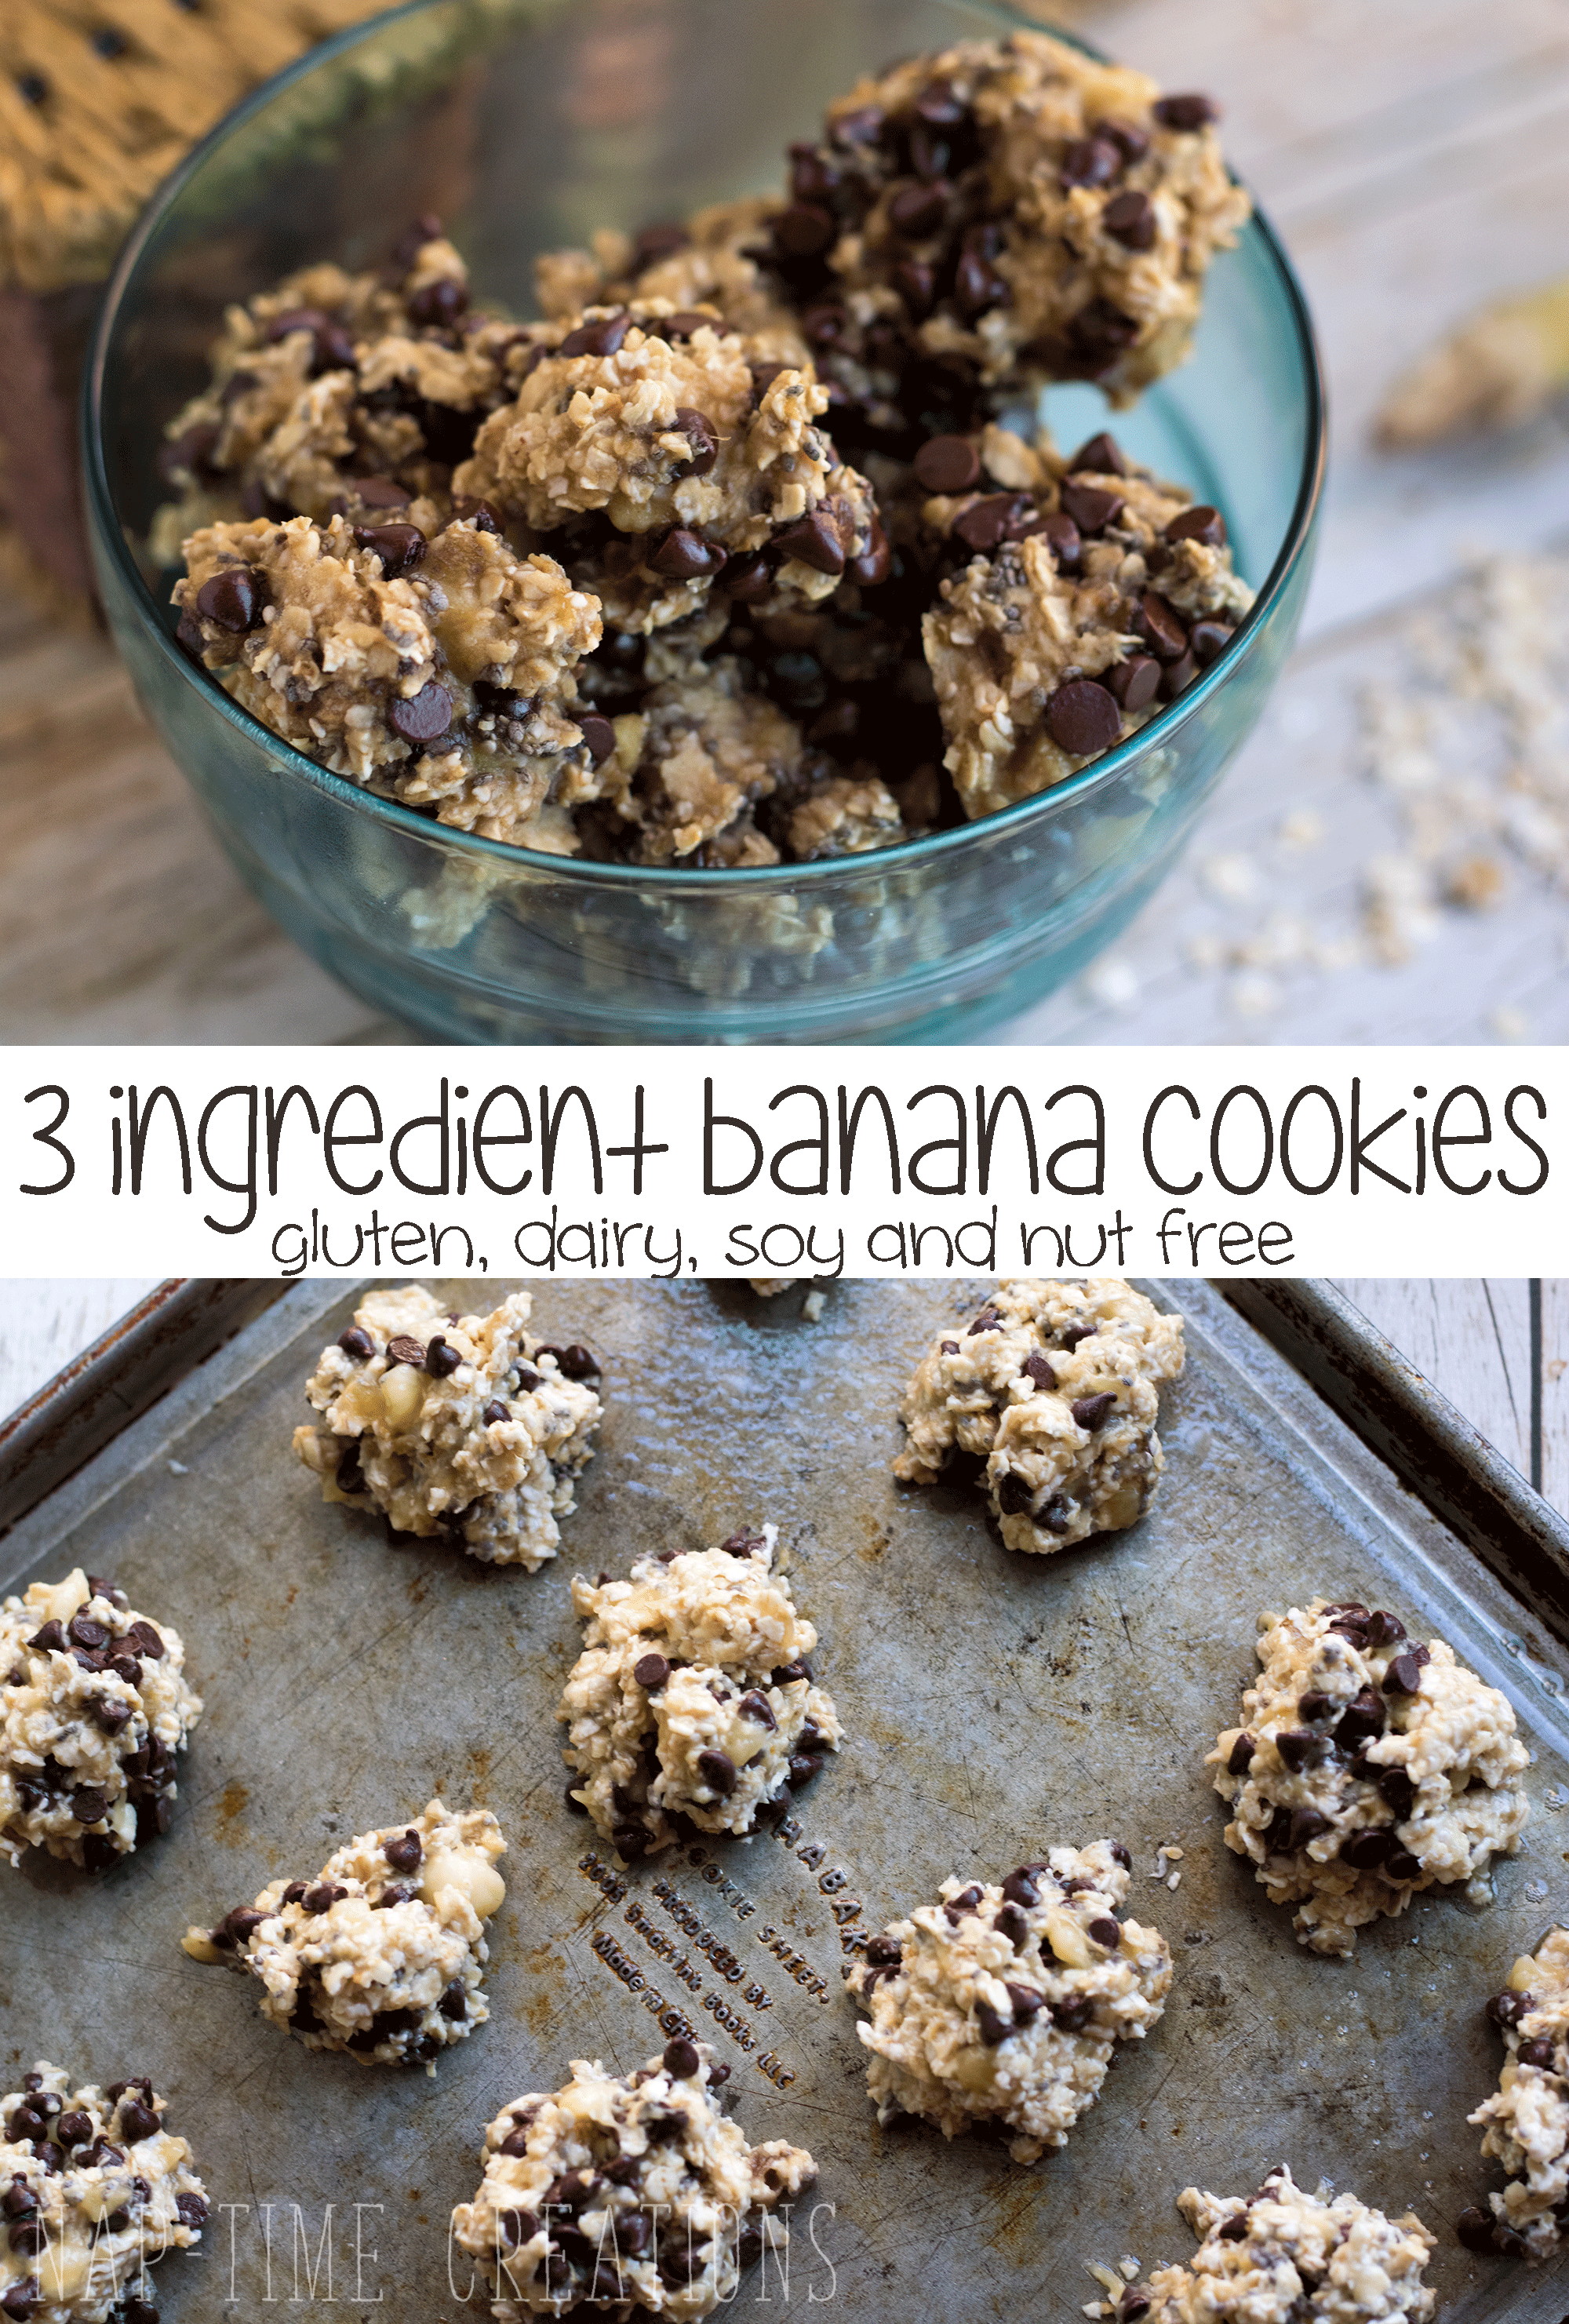 3 ingredient banana cookies allergy-compatible-recipe-from-Nap-Time-Creations